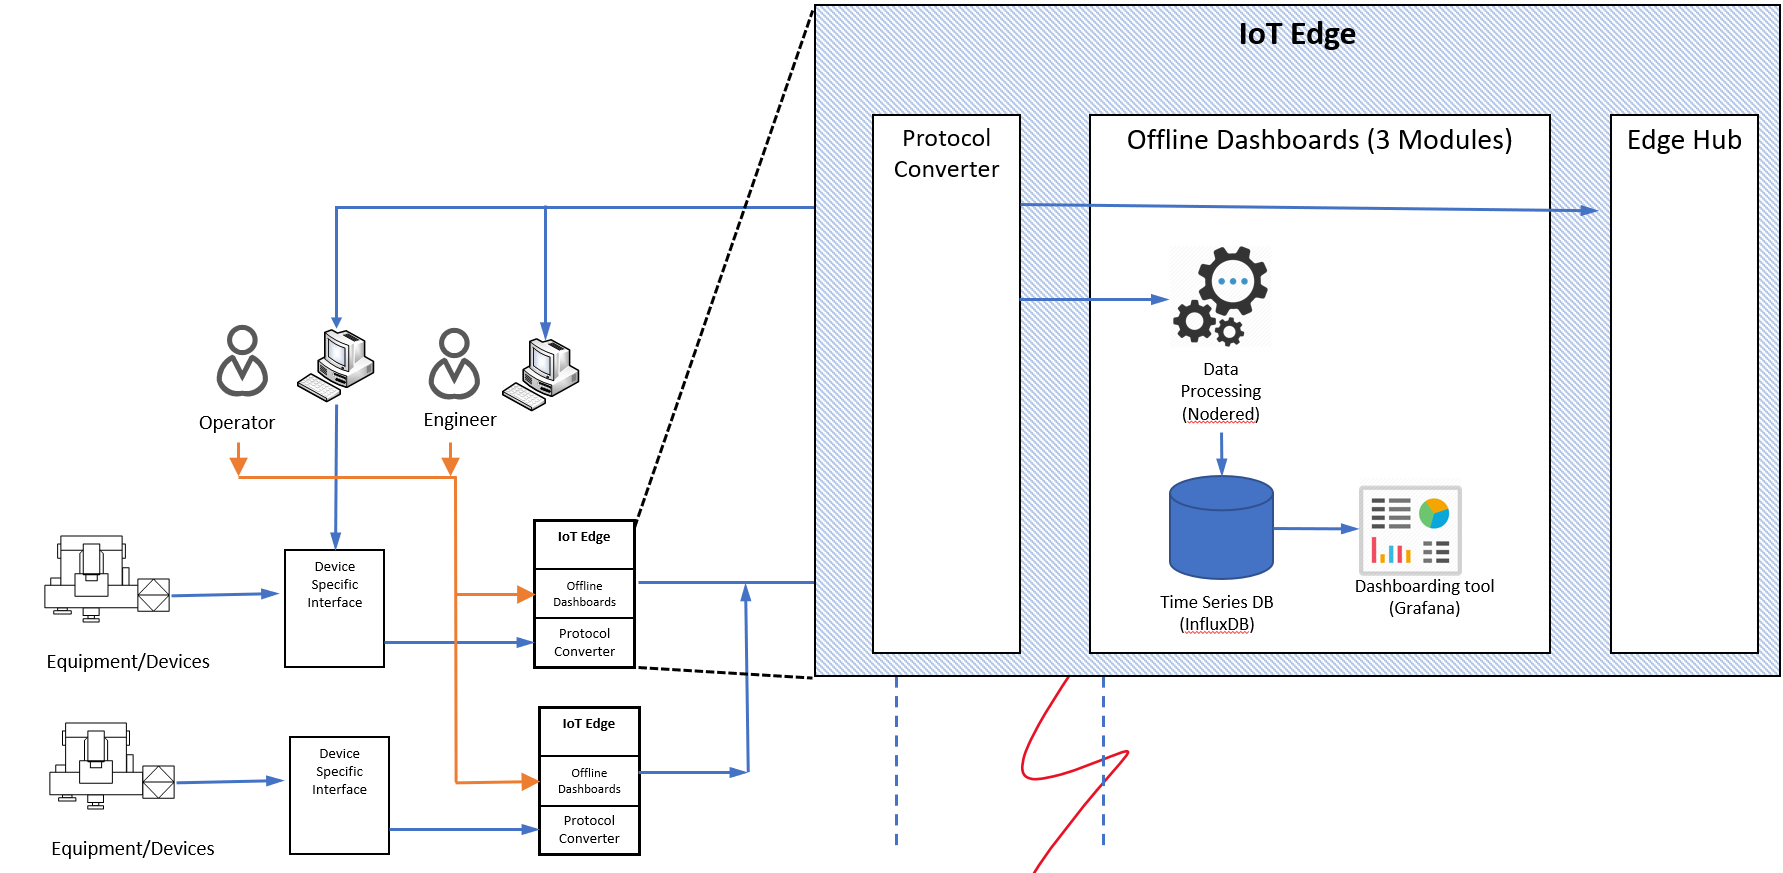 Diagram showing the Azure IoT Edge solution architecture